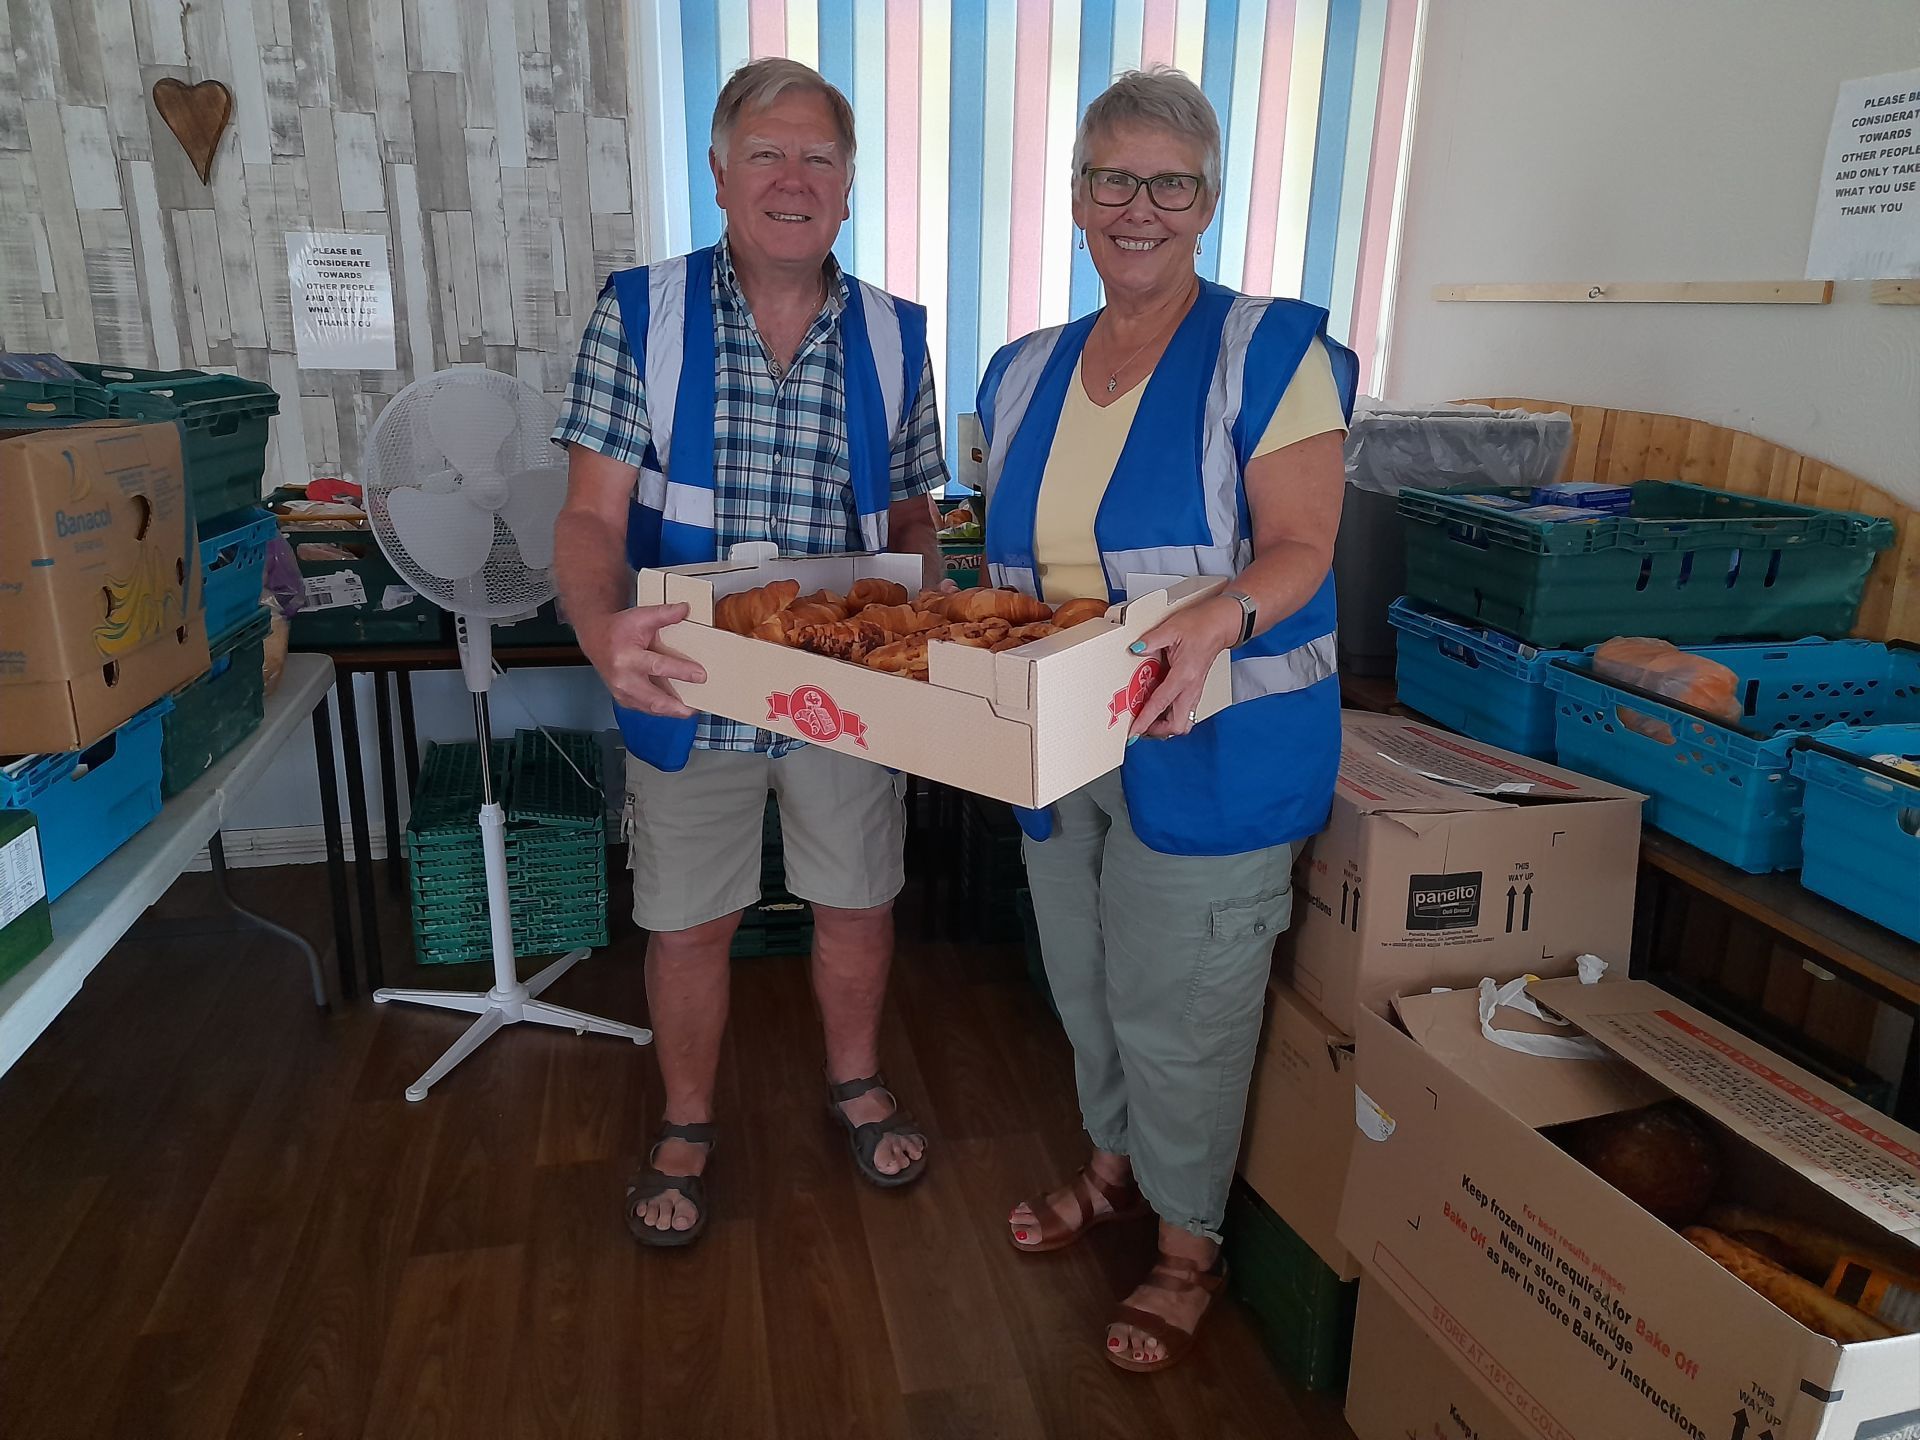 Two volunteers wearing blue hi-vis vests are holding a box of produce between and smiling. There are more boxes ready to unpack in the background.